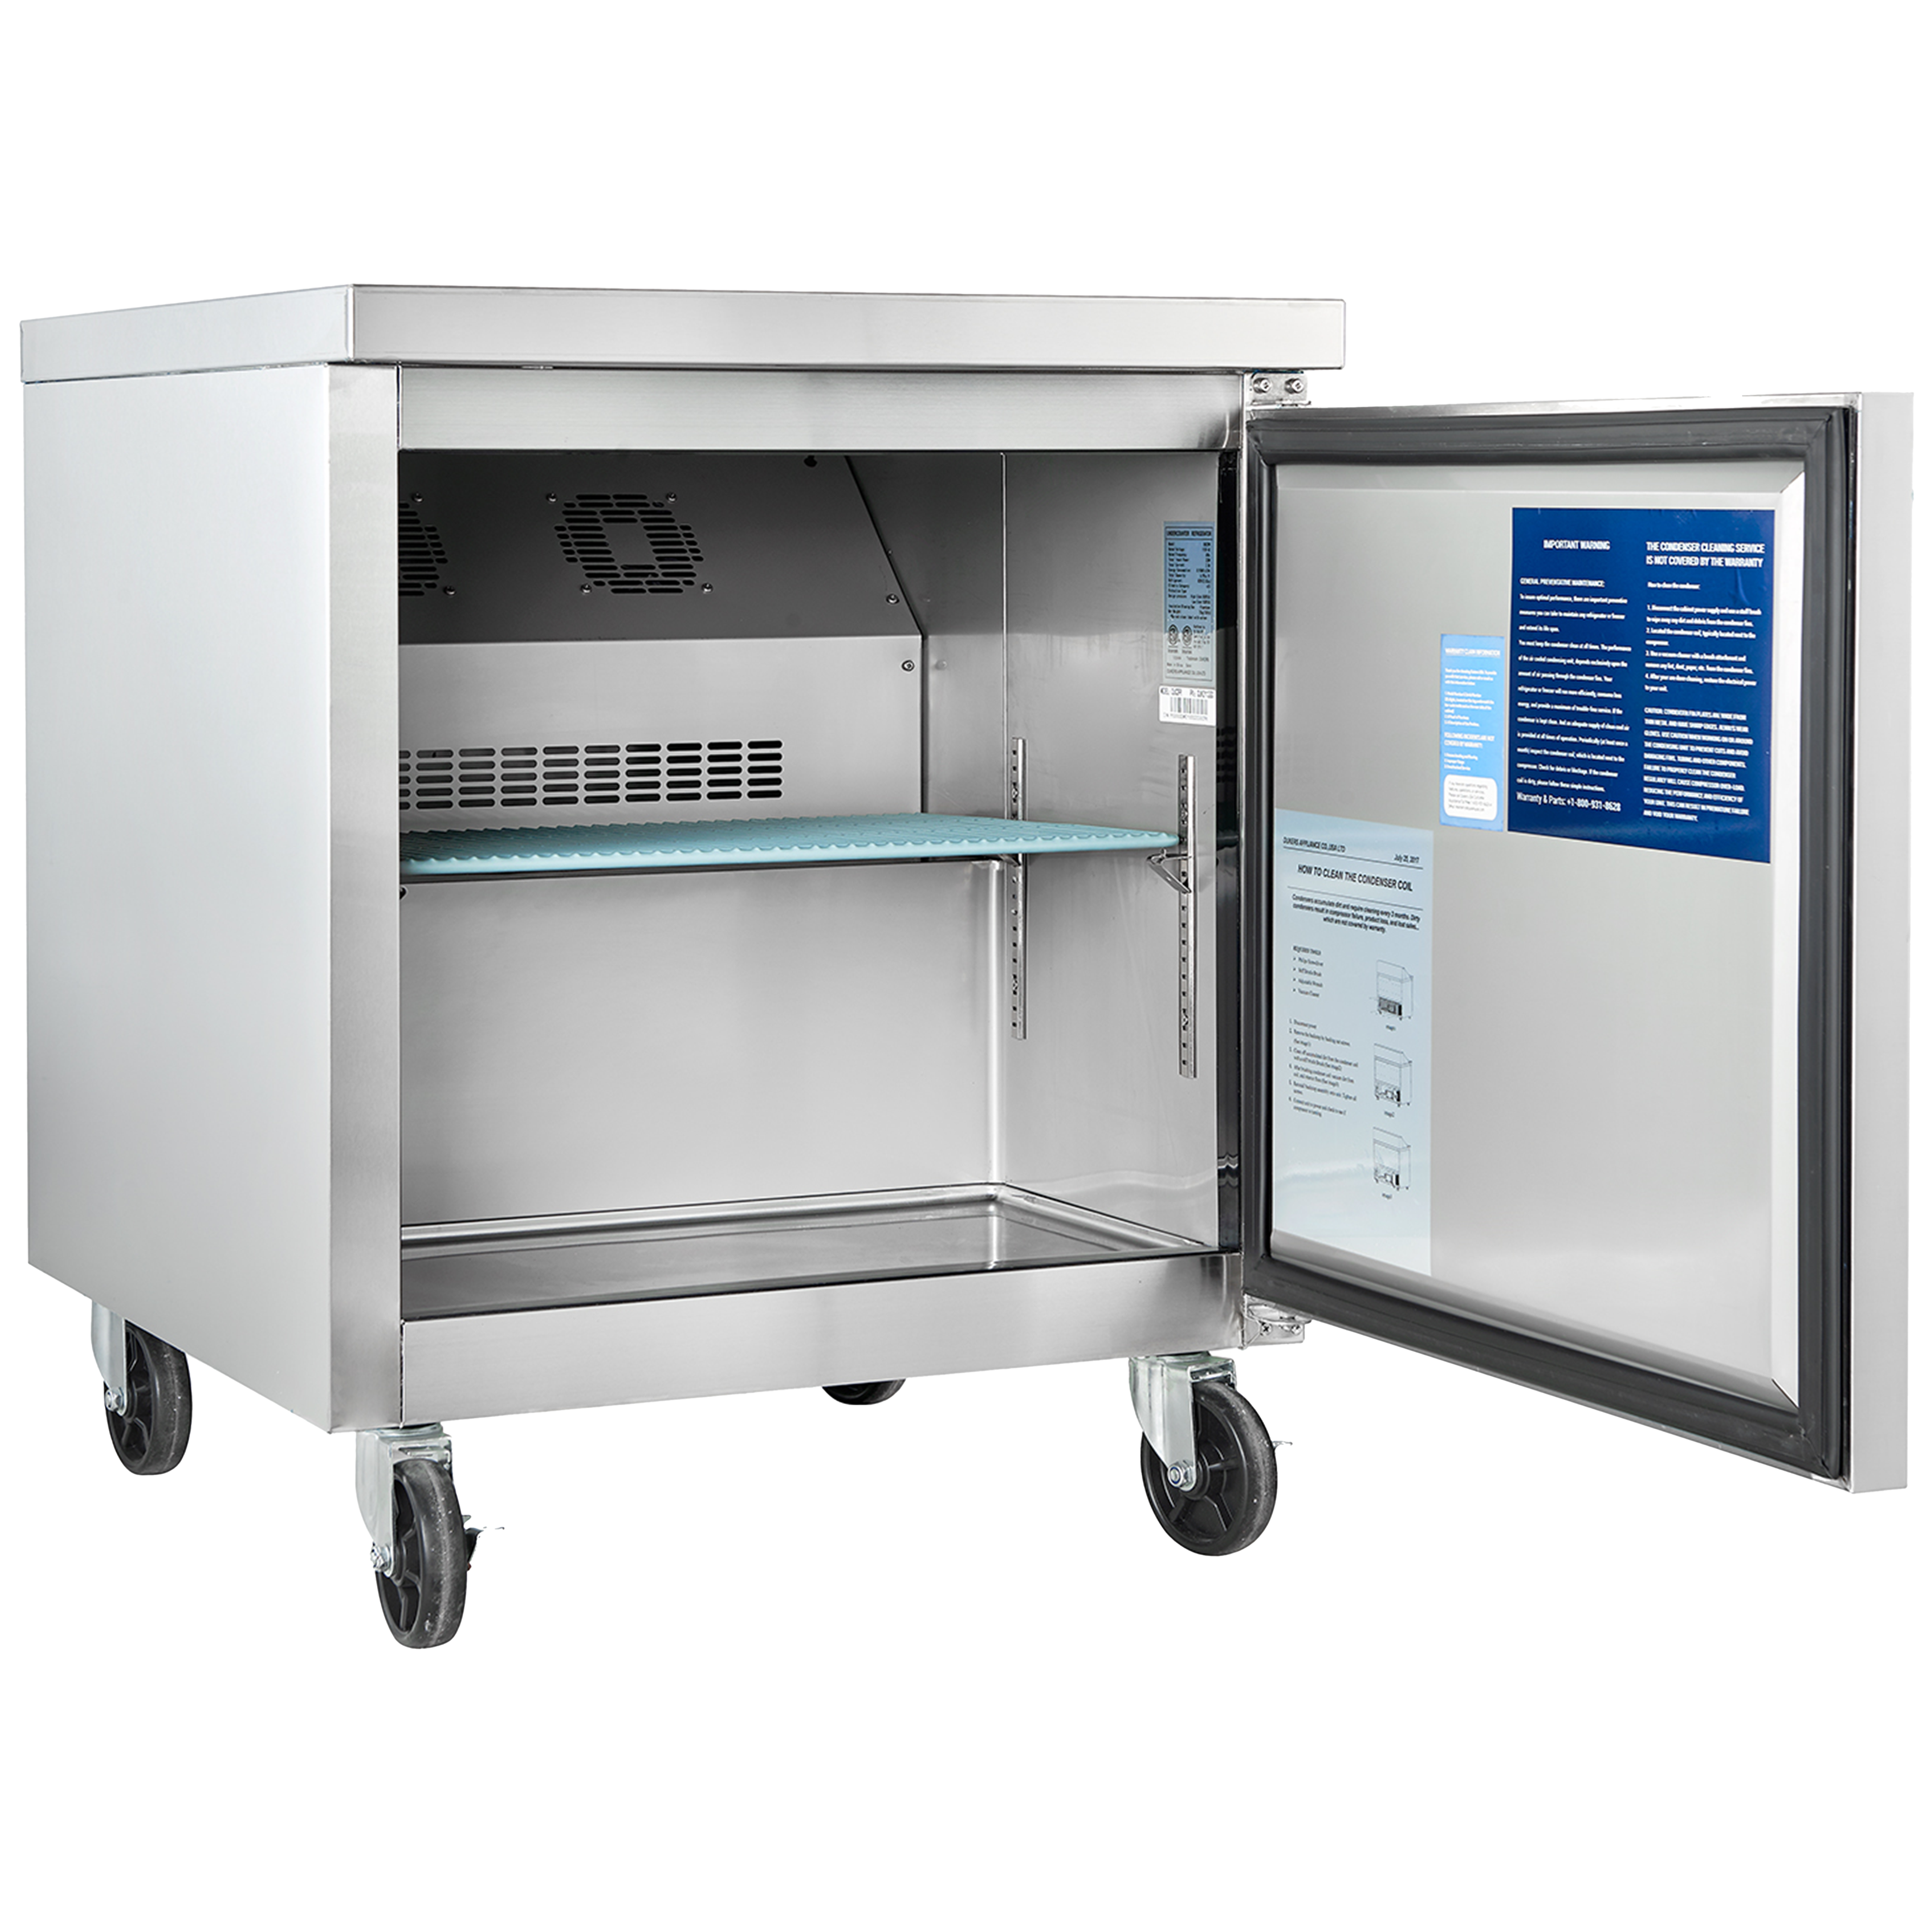 Side view of a 7 Cu Ft Stainless Steel Worktop Beverage Fridge with the door open, displaying interior space featuring one wire shelf